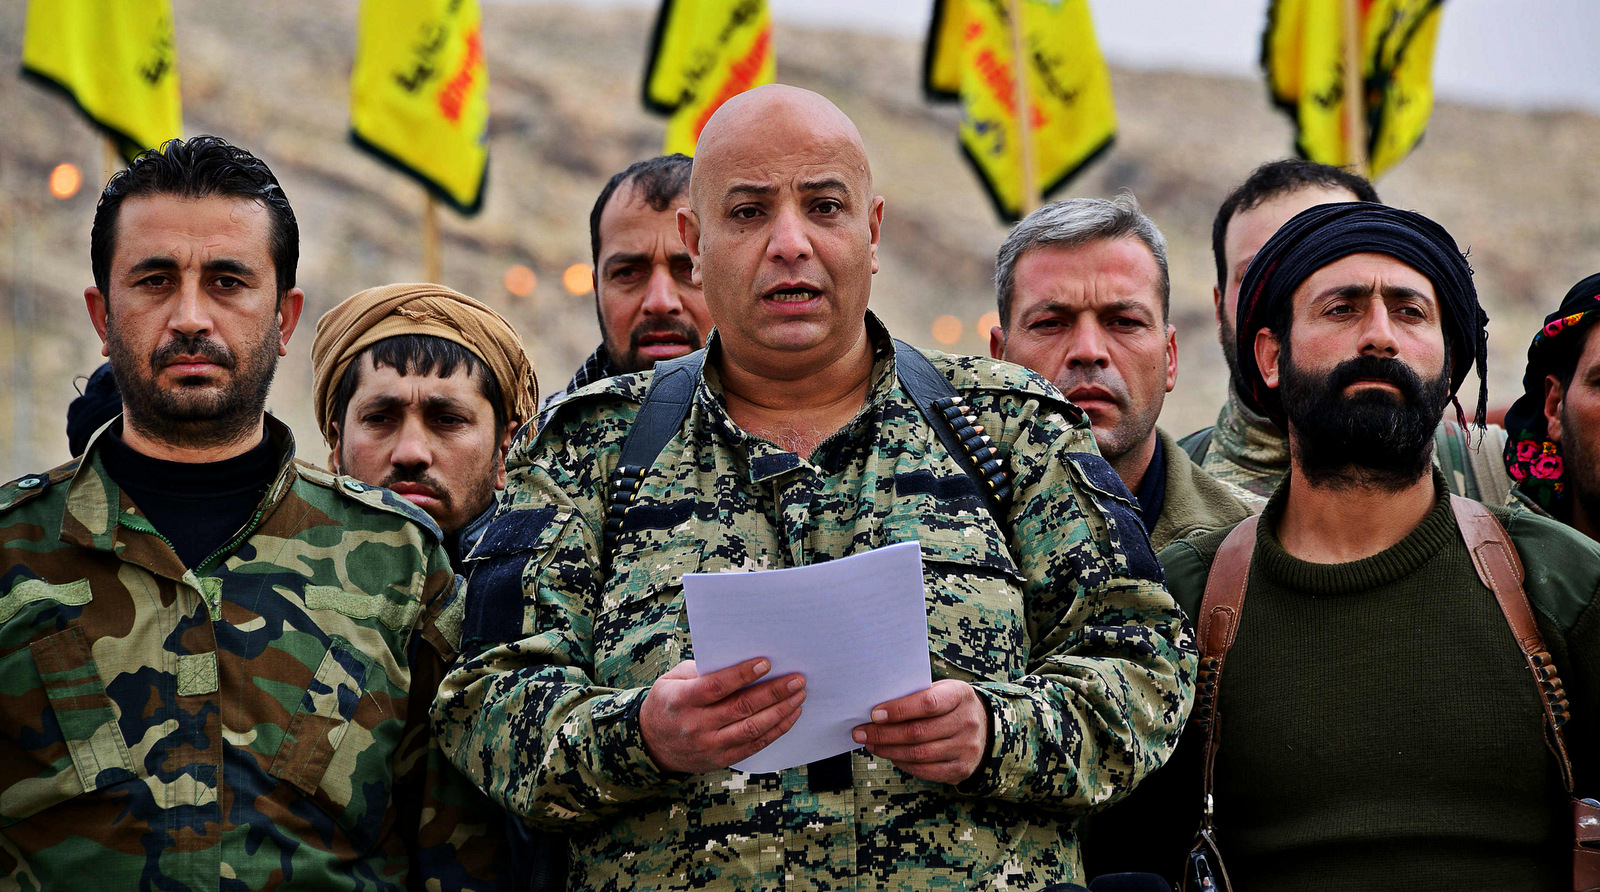 Former spokesman of the Syrian Democratic Forces (SDF), Talal Silo, pictured center, delivers a prepared statement to the press. (Photo: Twitter)